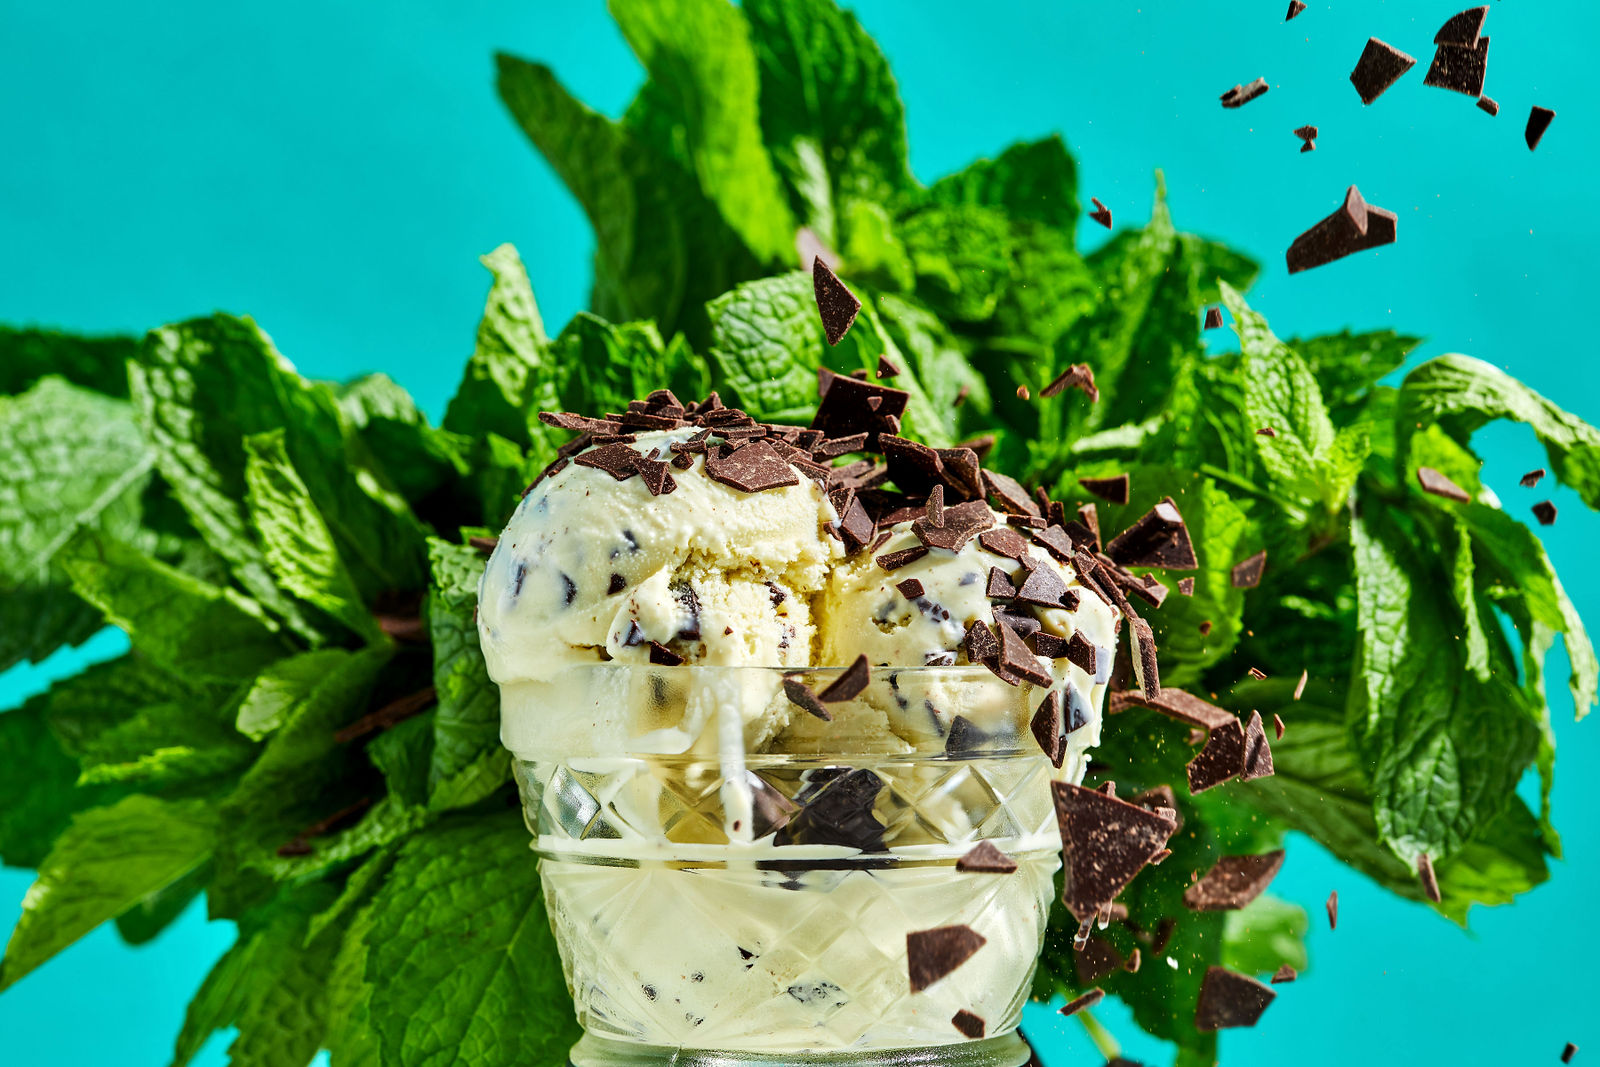 chocolate chips falling on scoops of ice cream with fresh mint leaves in the background